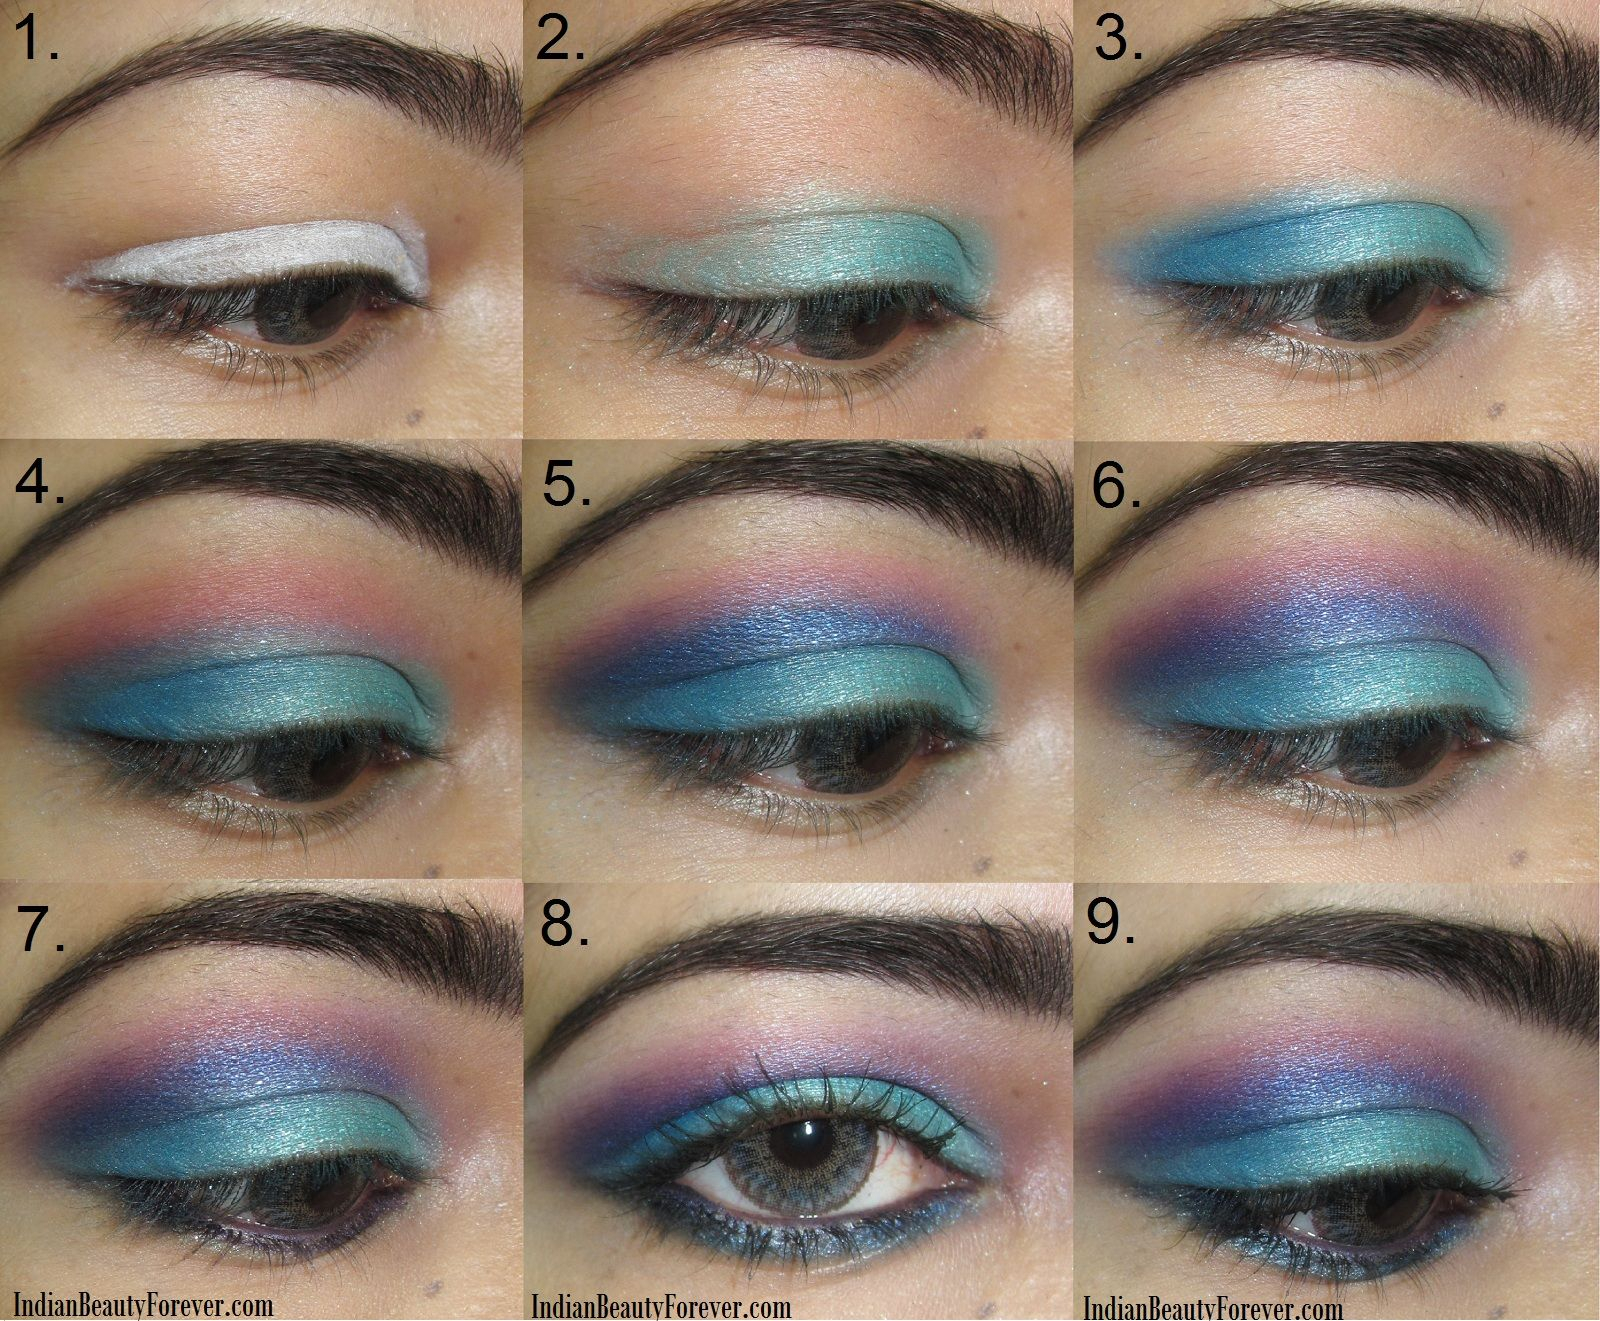 Eye Makeup Shades Diy 3 Shade Eye Shadow Pictures Photos And Images For Facebook